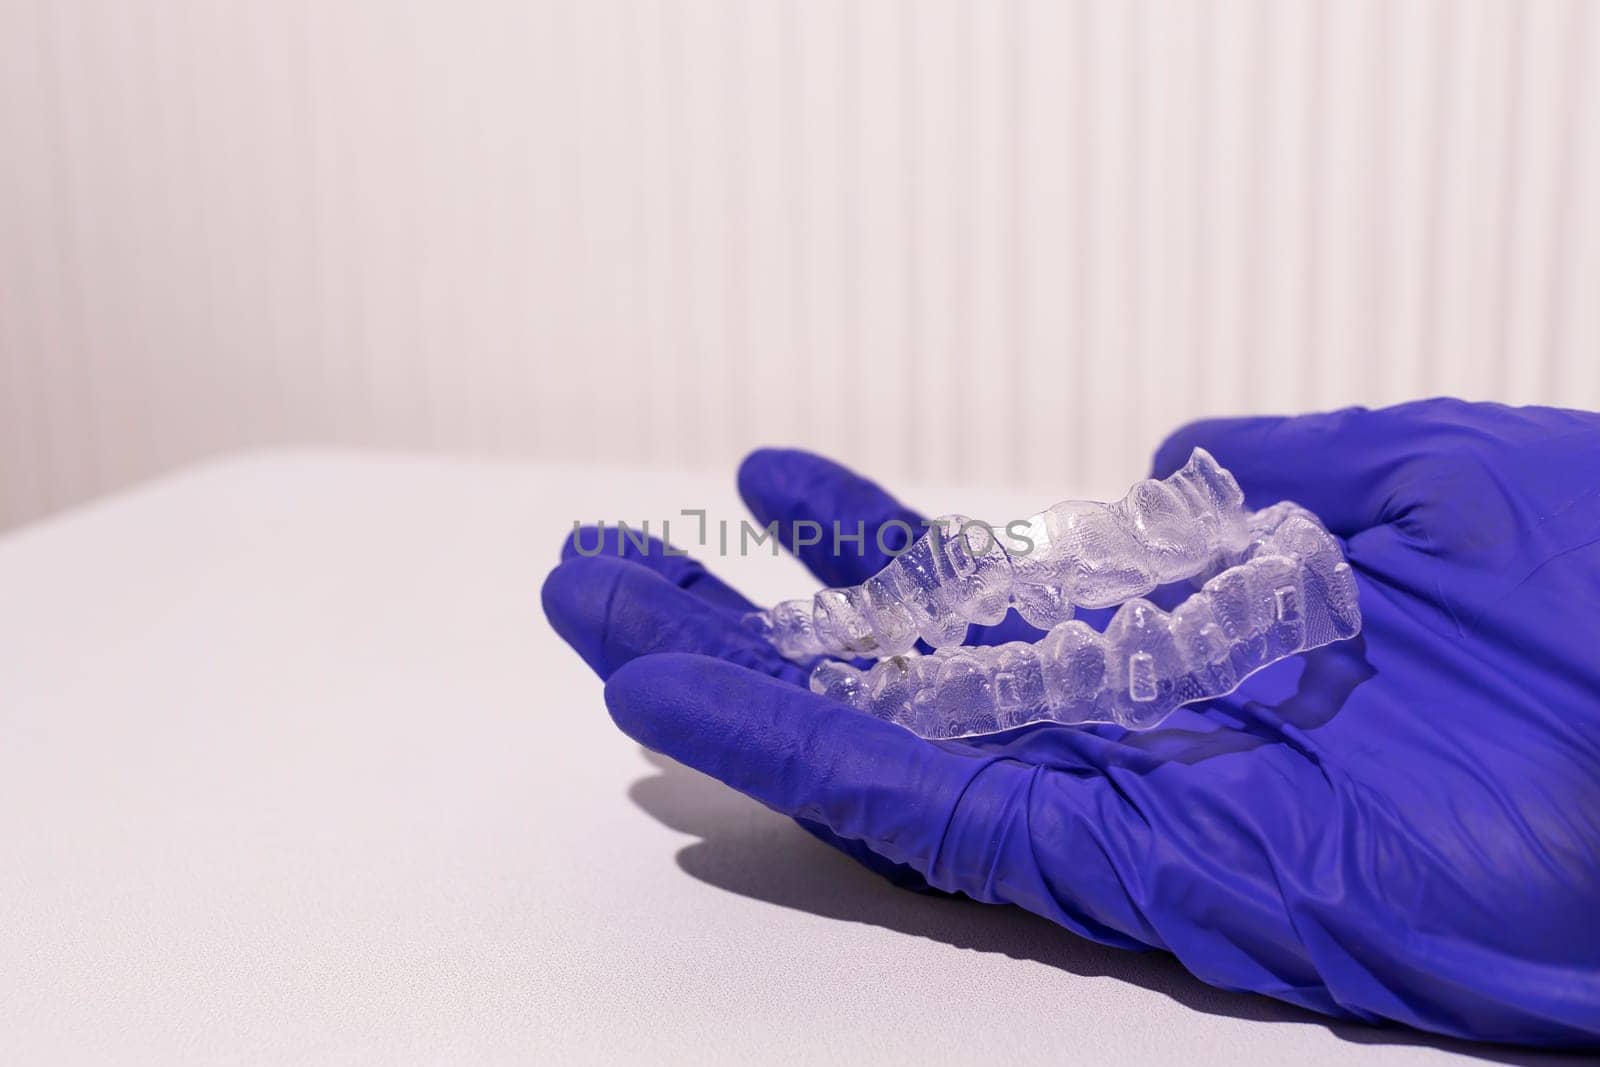 Closeup Invisible Orthodontics Cosmetic Aligners In Doctor's Hand. Adjusting Transparent, Invisalign Braces. Dental Care, Orthodontic. Copy Space For Text, Horizontal Plane. Mockup by netatsi